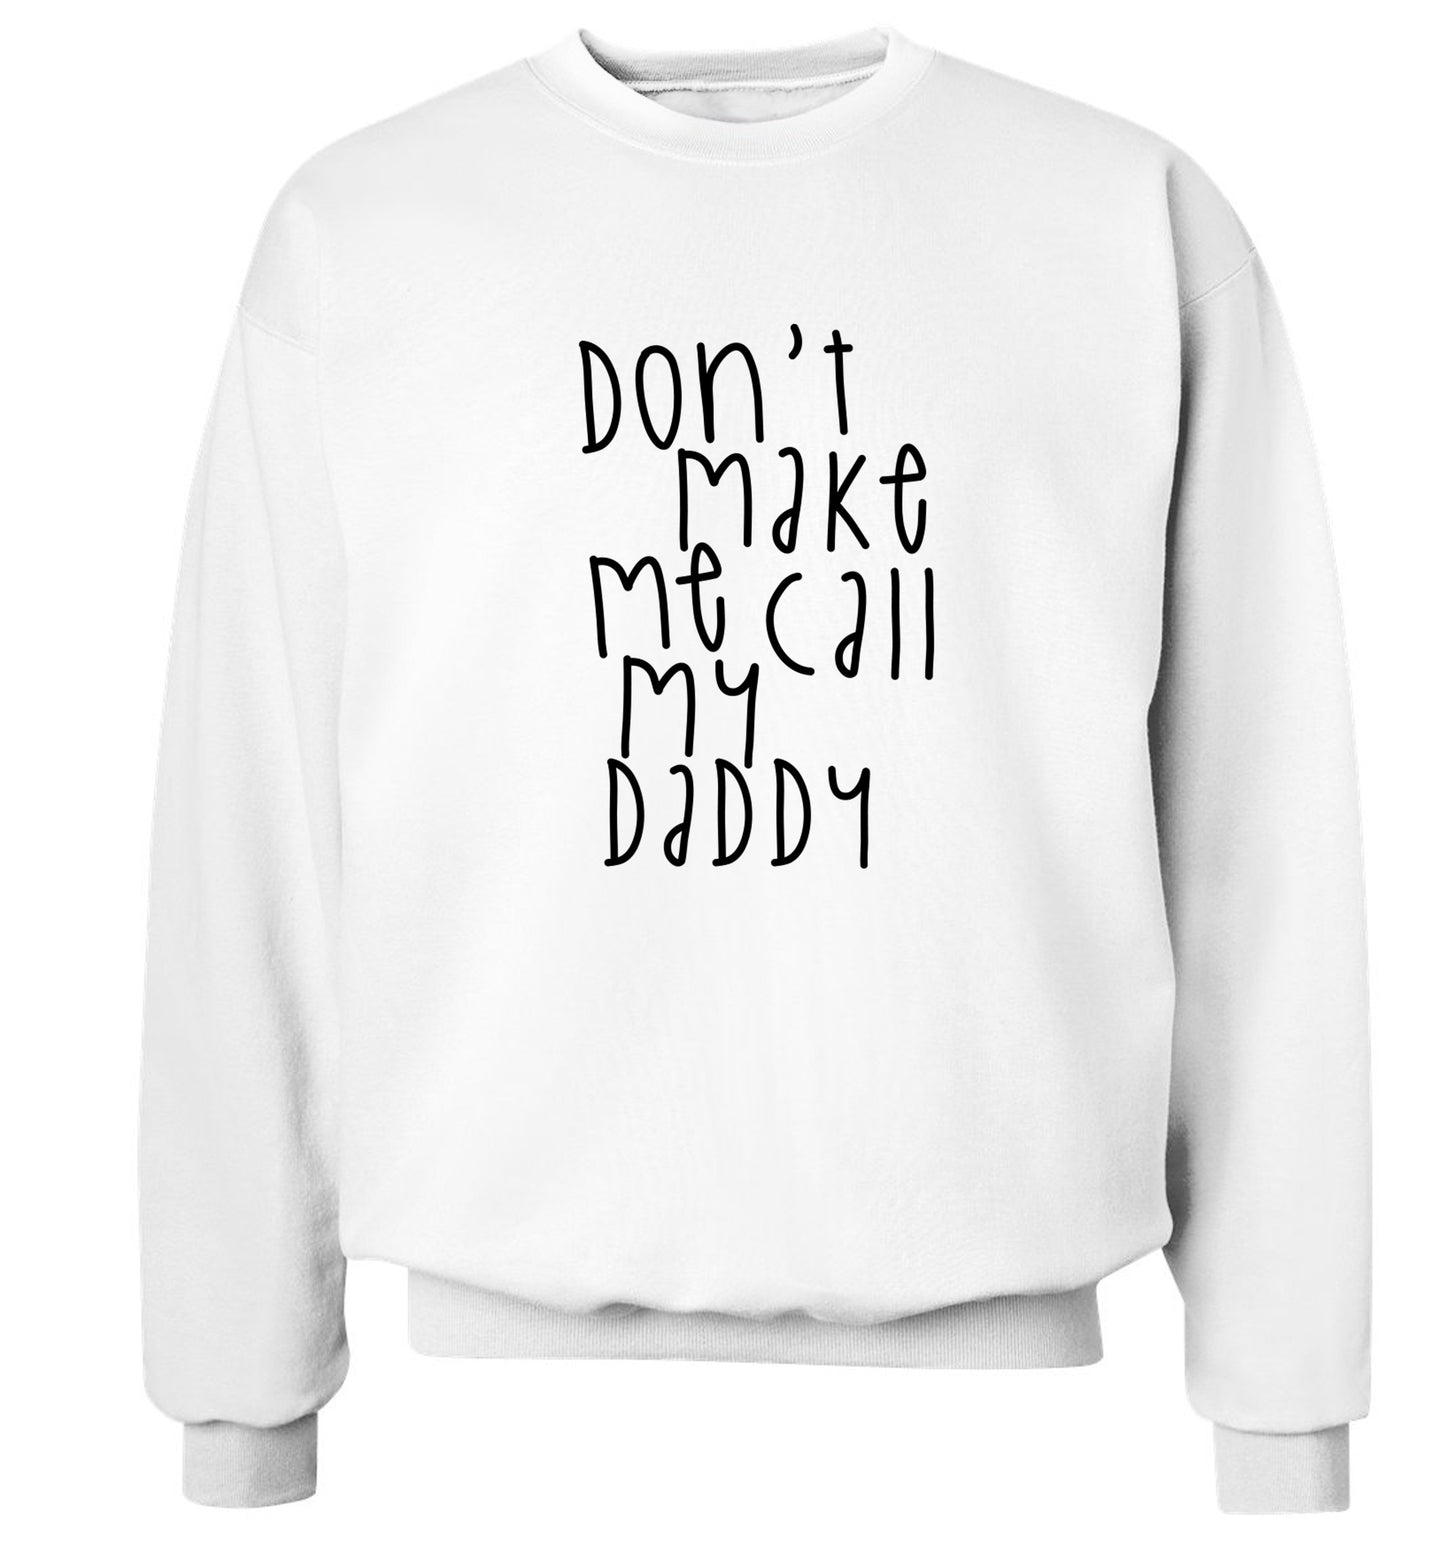 Don't make me call my daddy Adult's unisex white Sweater 2XL